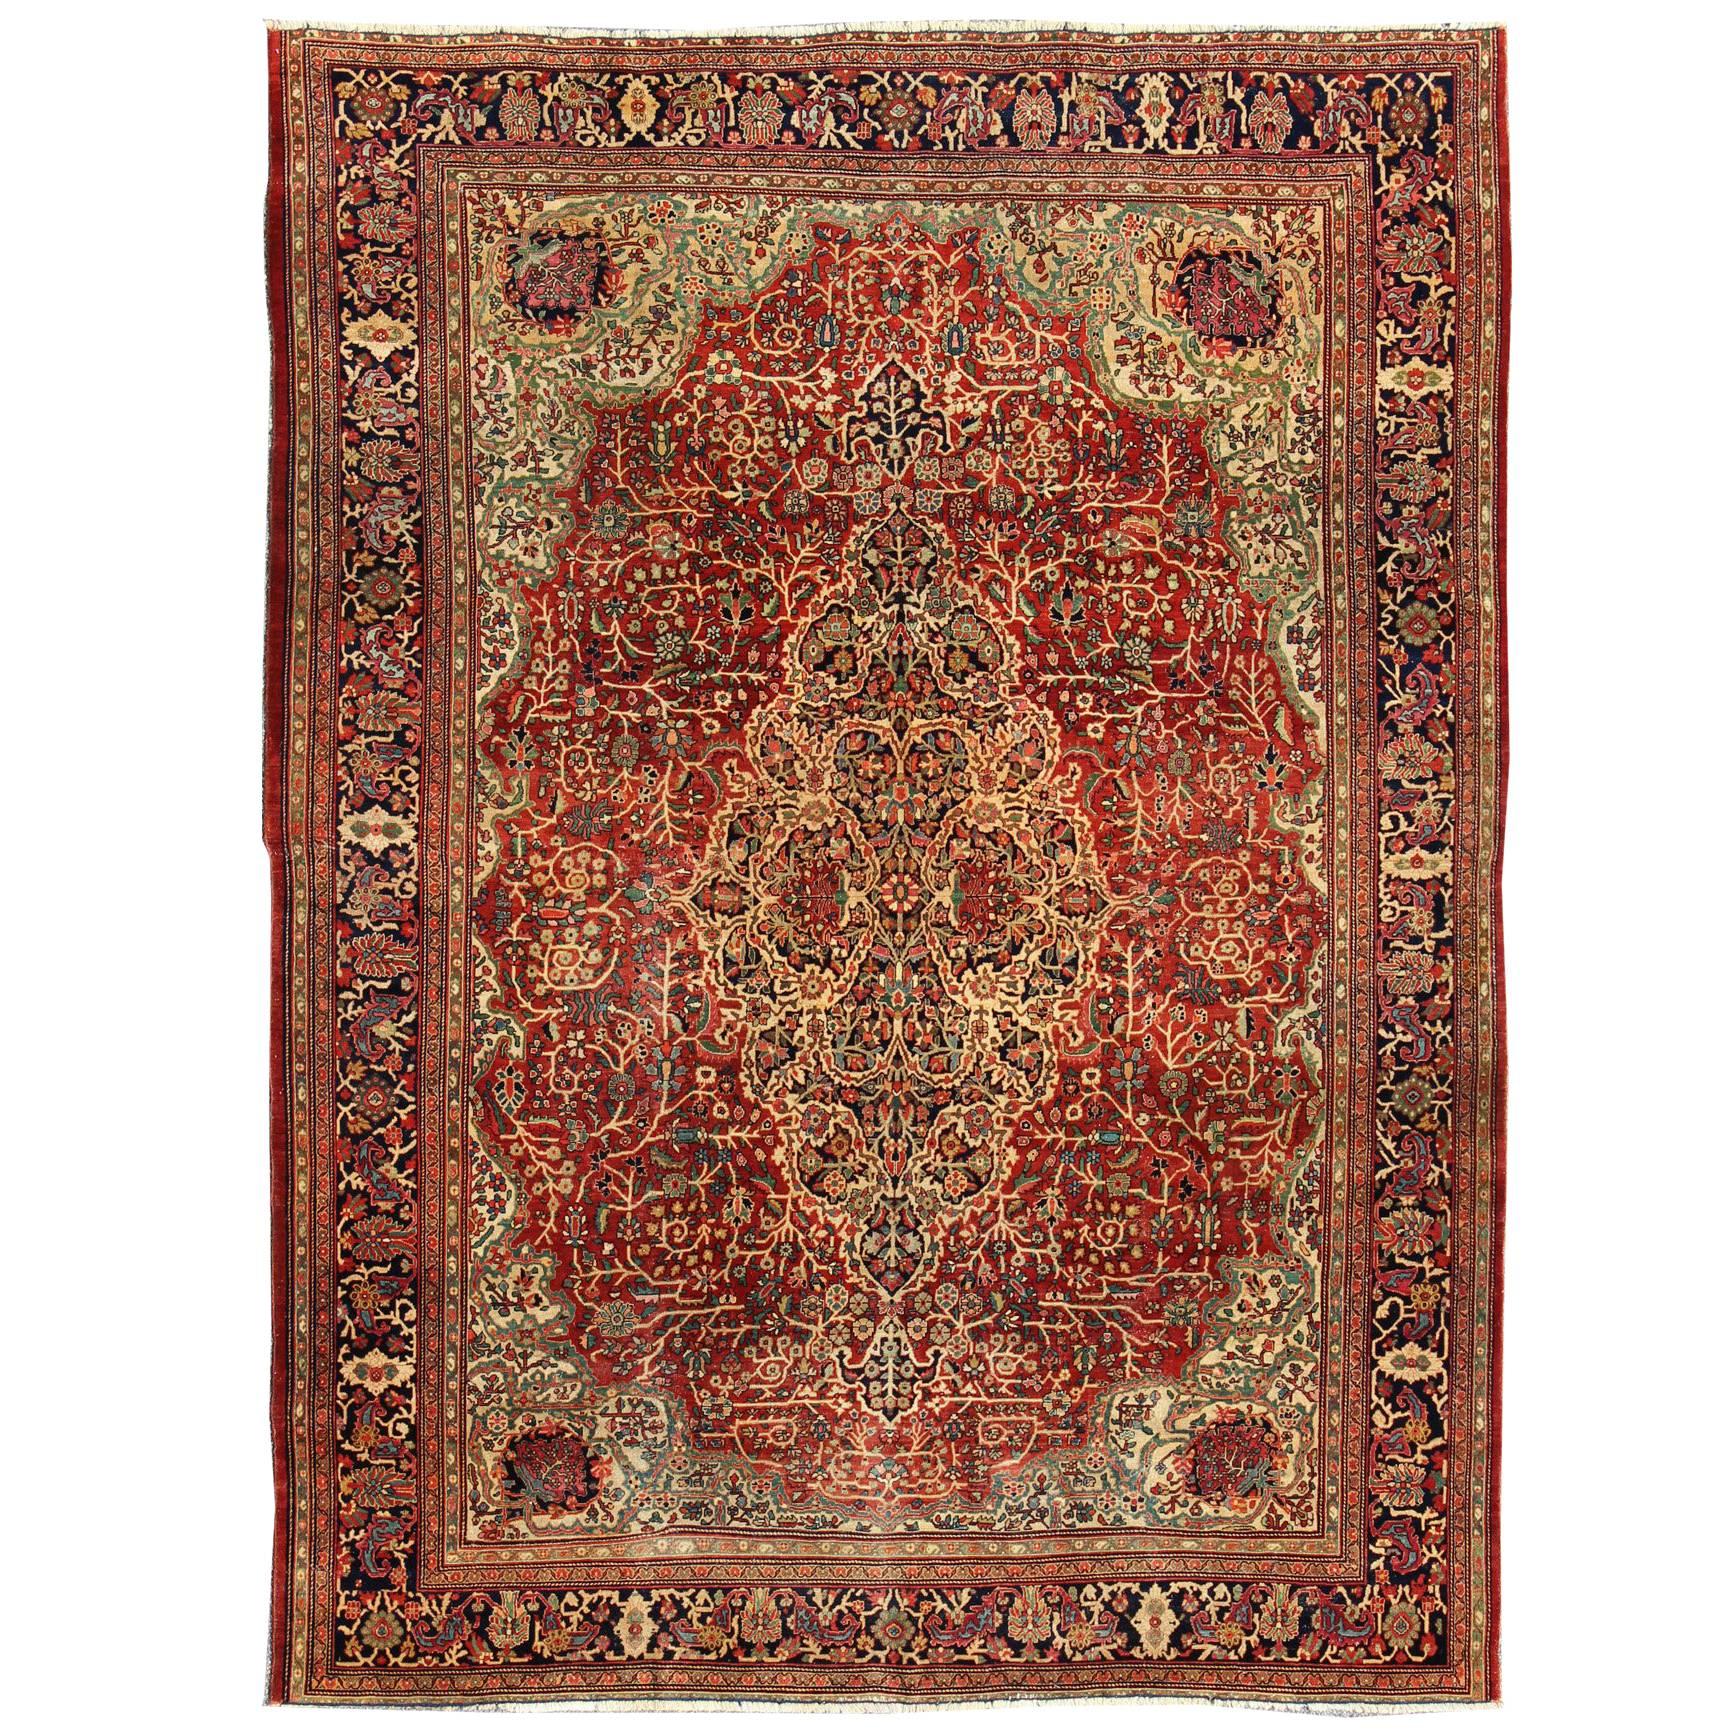  19th Century Antique Persian Sarouk Feraghan Rug with intricate Classic Design For Sale